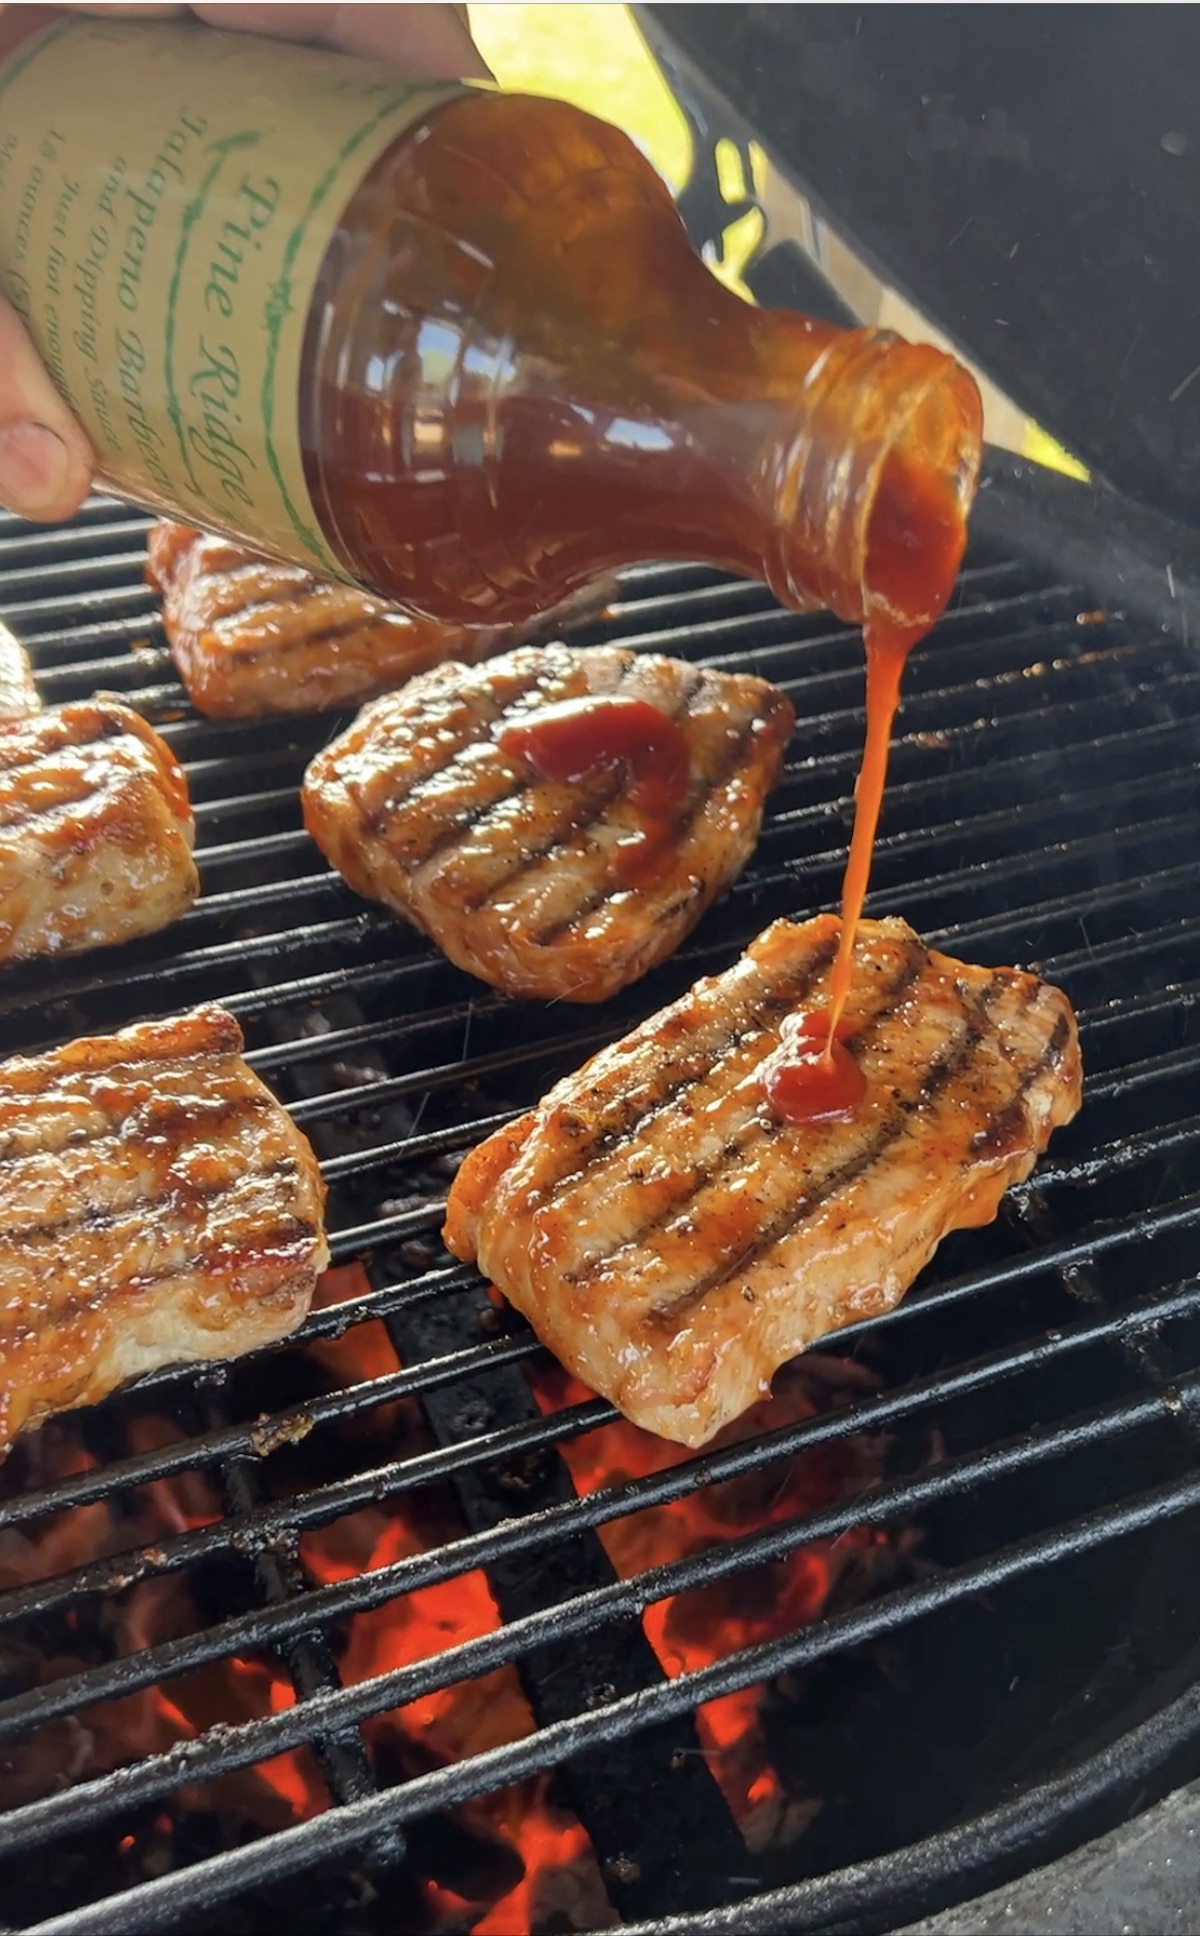 Pouring bbq sauce onto pork chops on a grill.